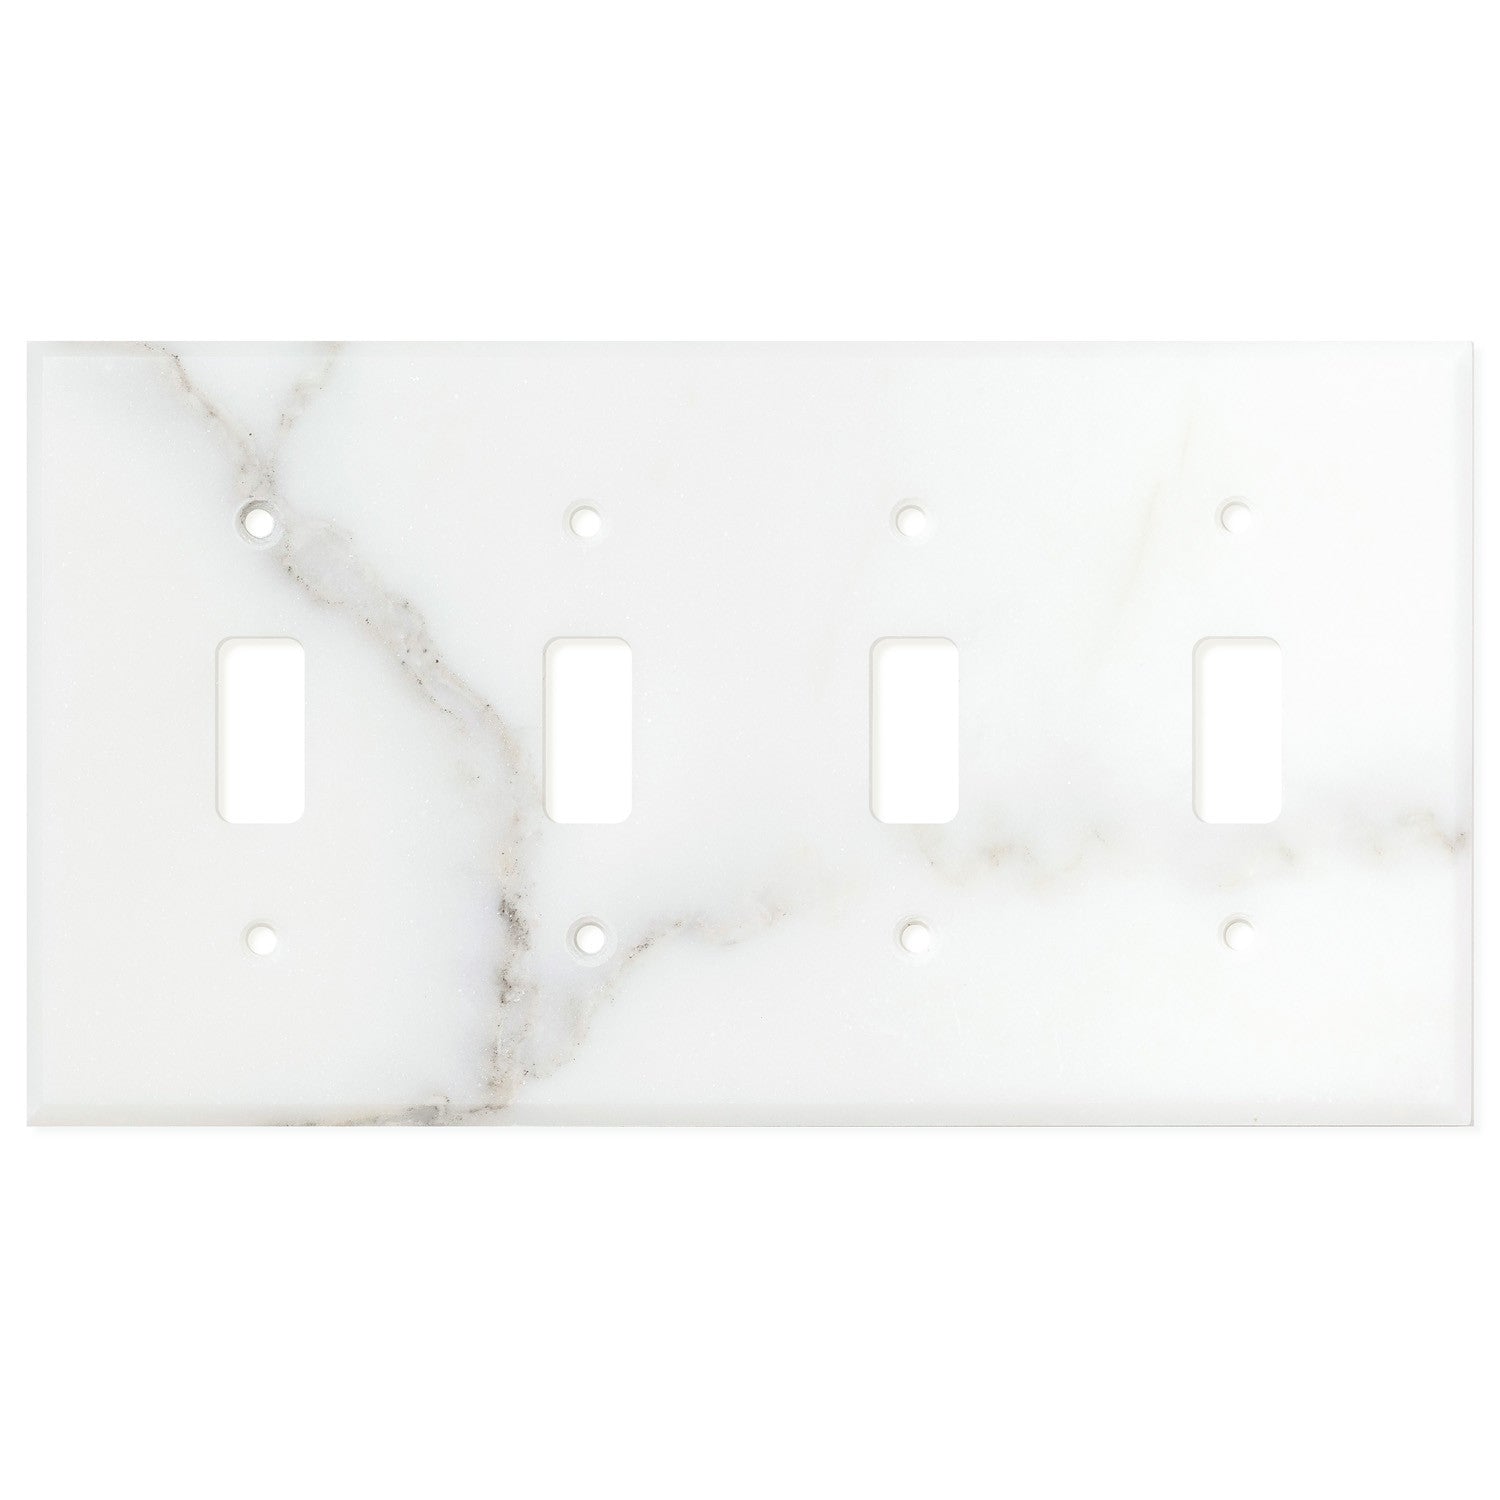 Calacatta Gold Marble Switch Plate Cover, Honed (4 TOGGLE) - Tilephile